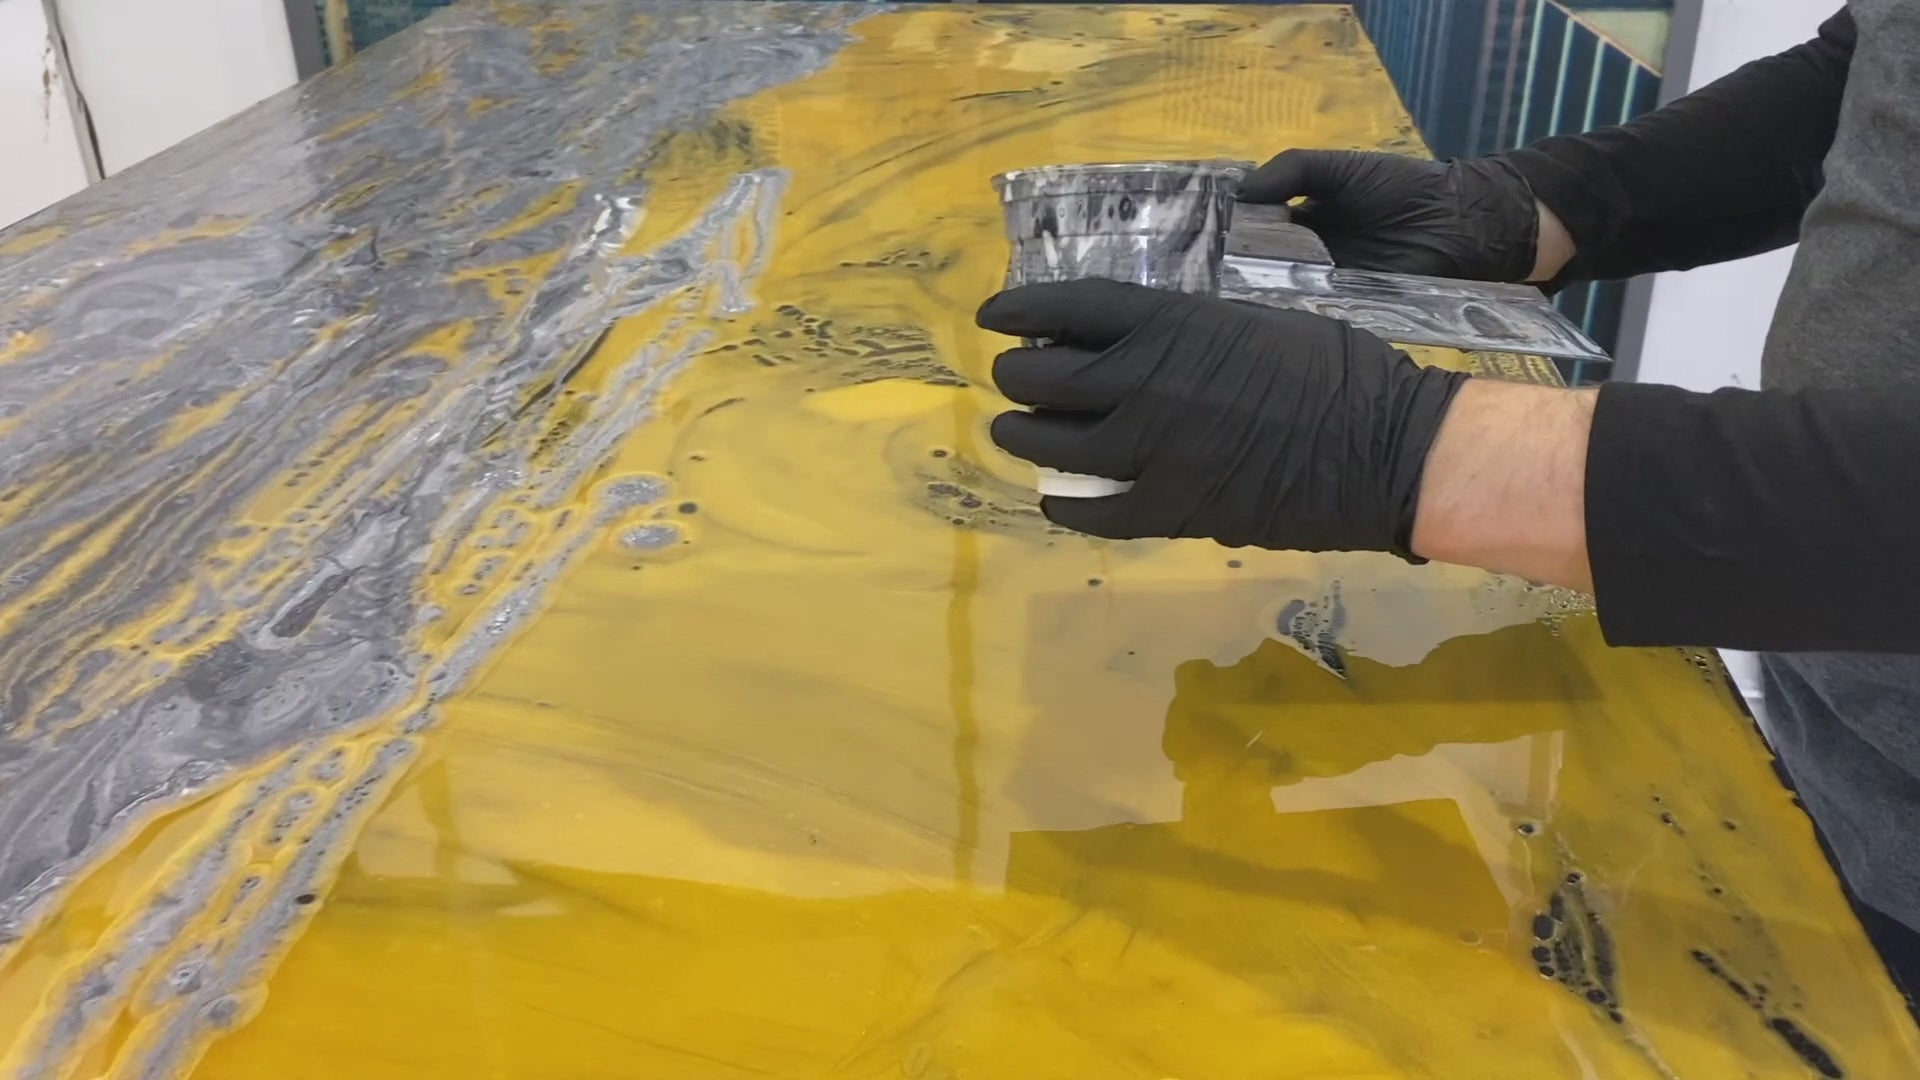 Revitalize Your Countertops - CAIRO ALLOY Epoxy Resin for a Unique Look